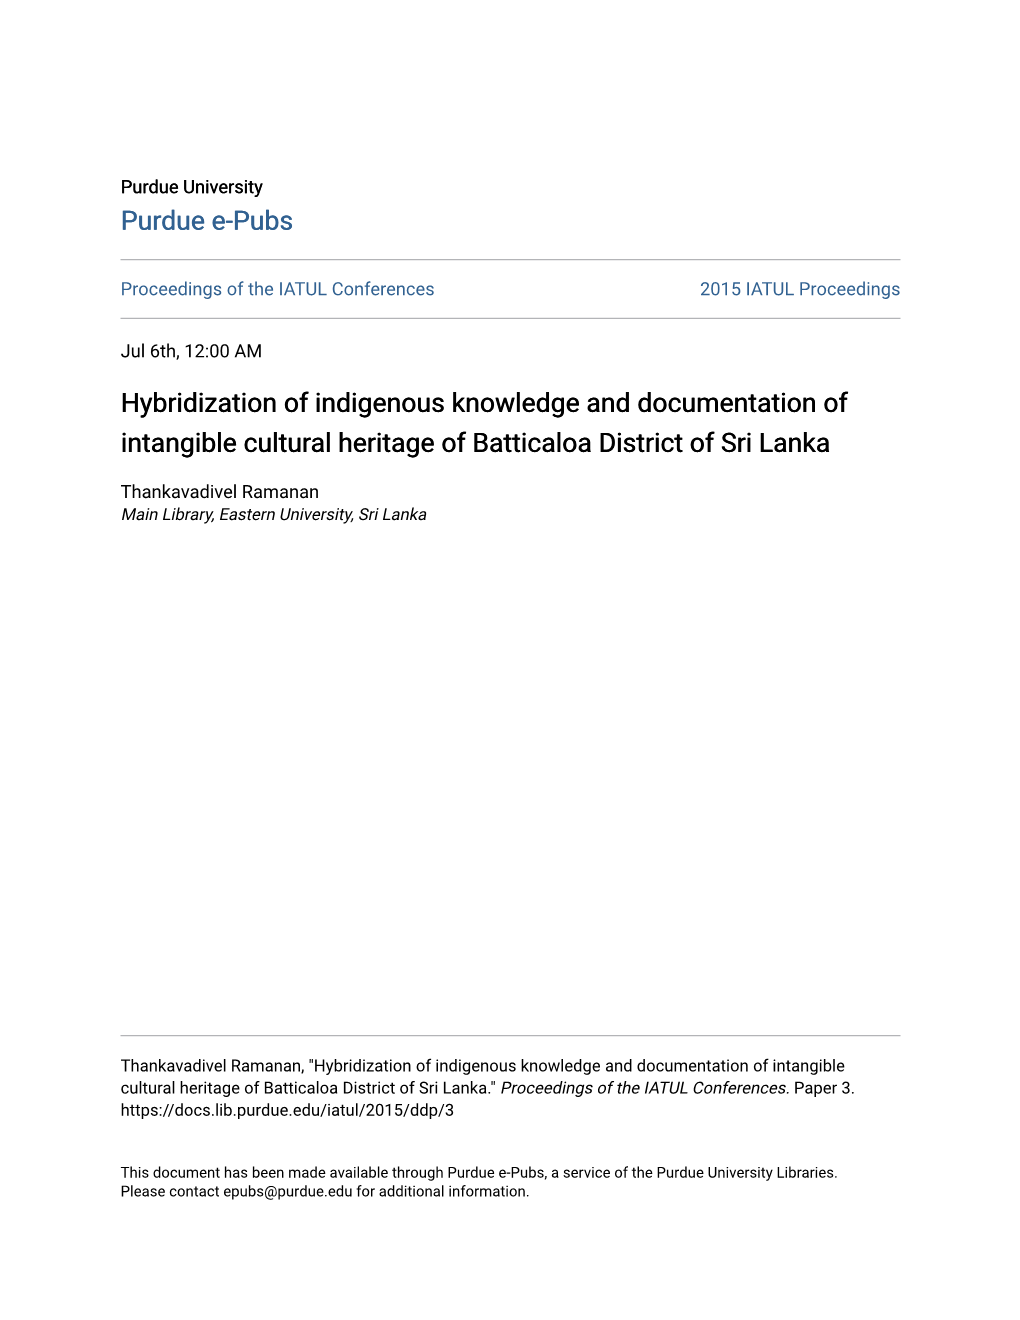 Hybridization of Indigenous Knowledge and Documentation of Intangible Cultural Heritage of Batticaloa District of Sri Lanka